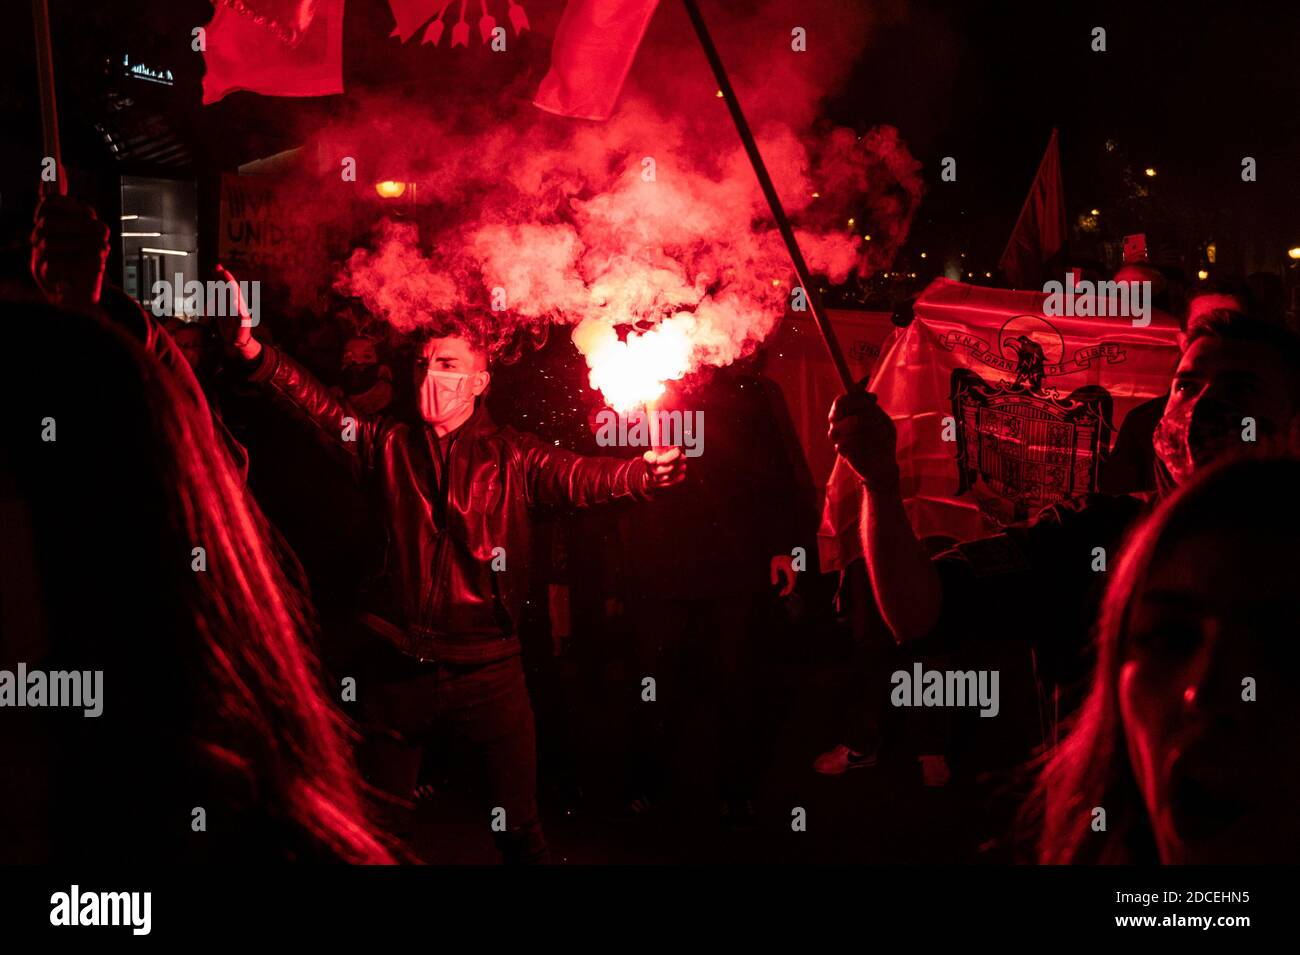 Madrid, Spain. 20th Nov, 2020. Far right wing supporter making a fascist salute holding a flare and people carrying a pre-constitutional Spanish flag during a rally to commemorate the death anniversary of Falange founder Jose Antonio Primo de Rivera. Credit: Marcos del Mazo/Alamy Live News Stock Photo